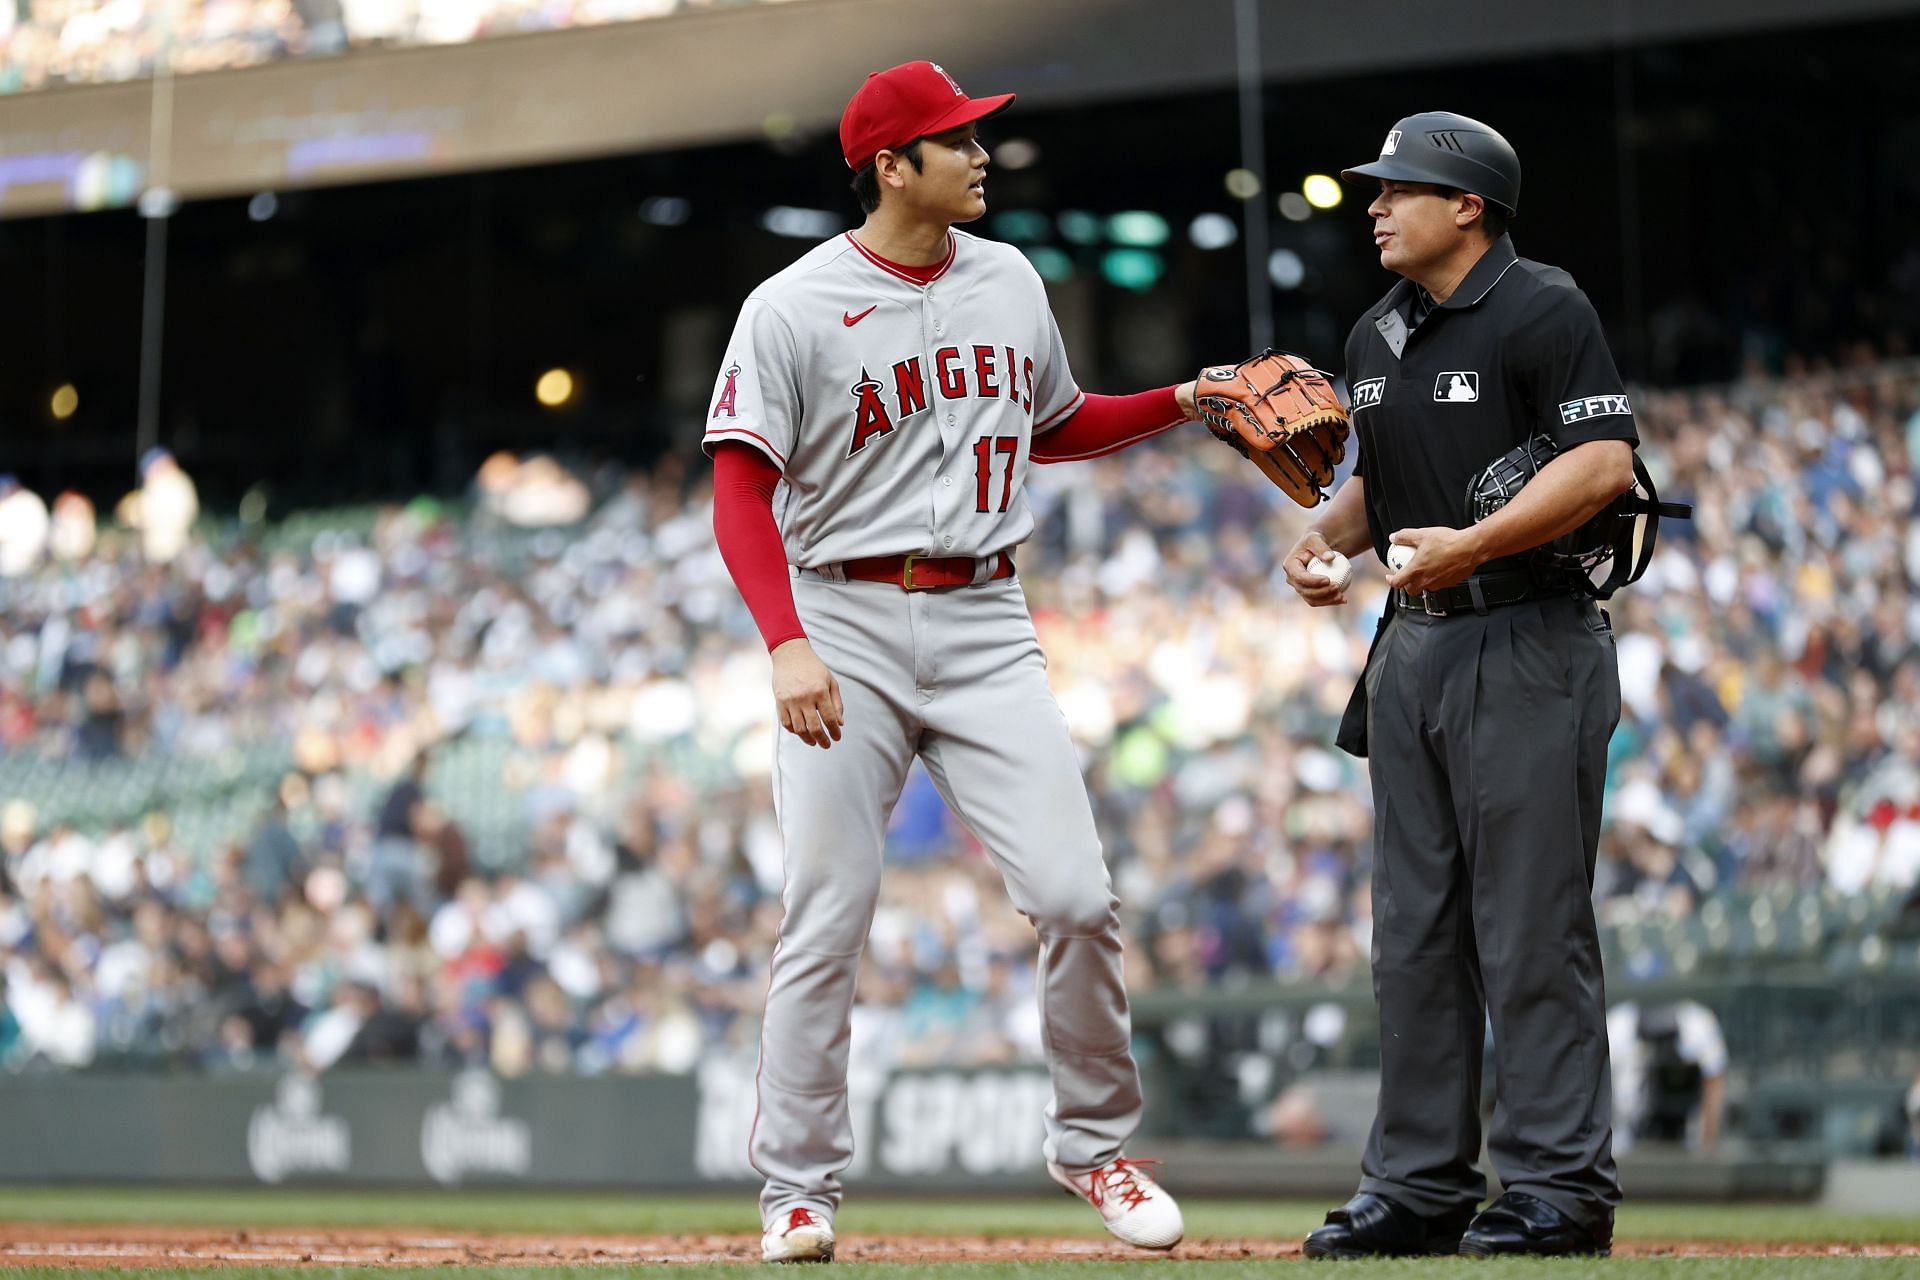 Ohtani chats with the ump during a Los Angeles Angels v Seattle Mariners game.